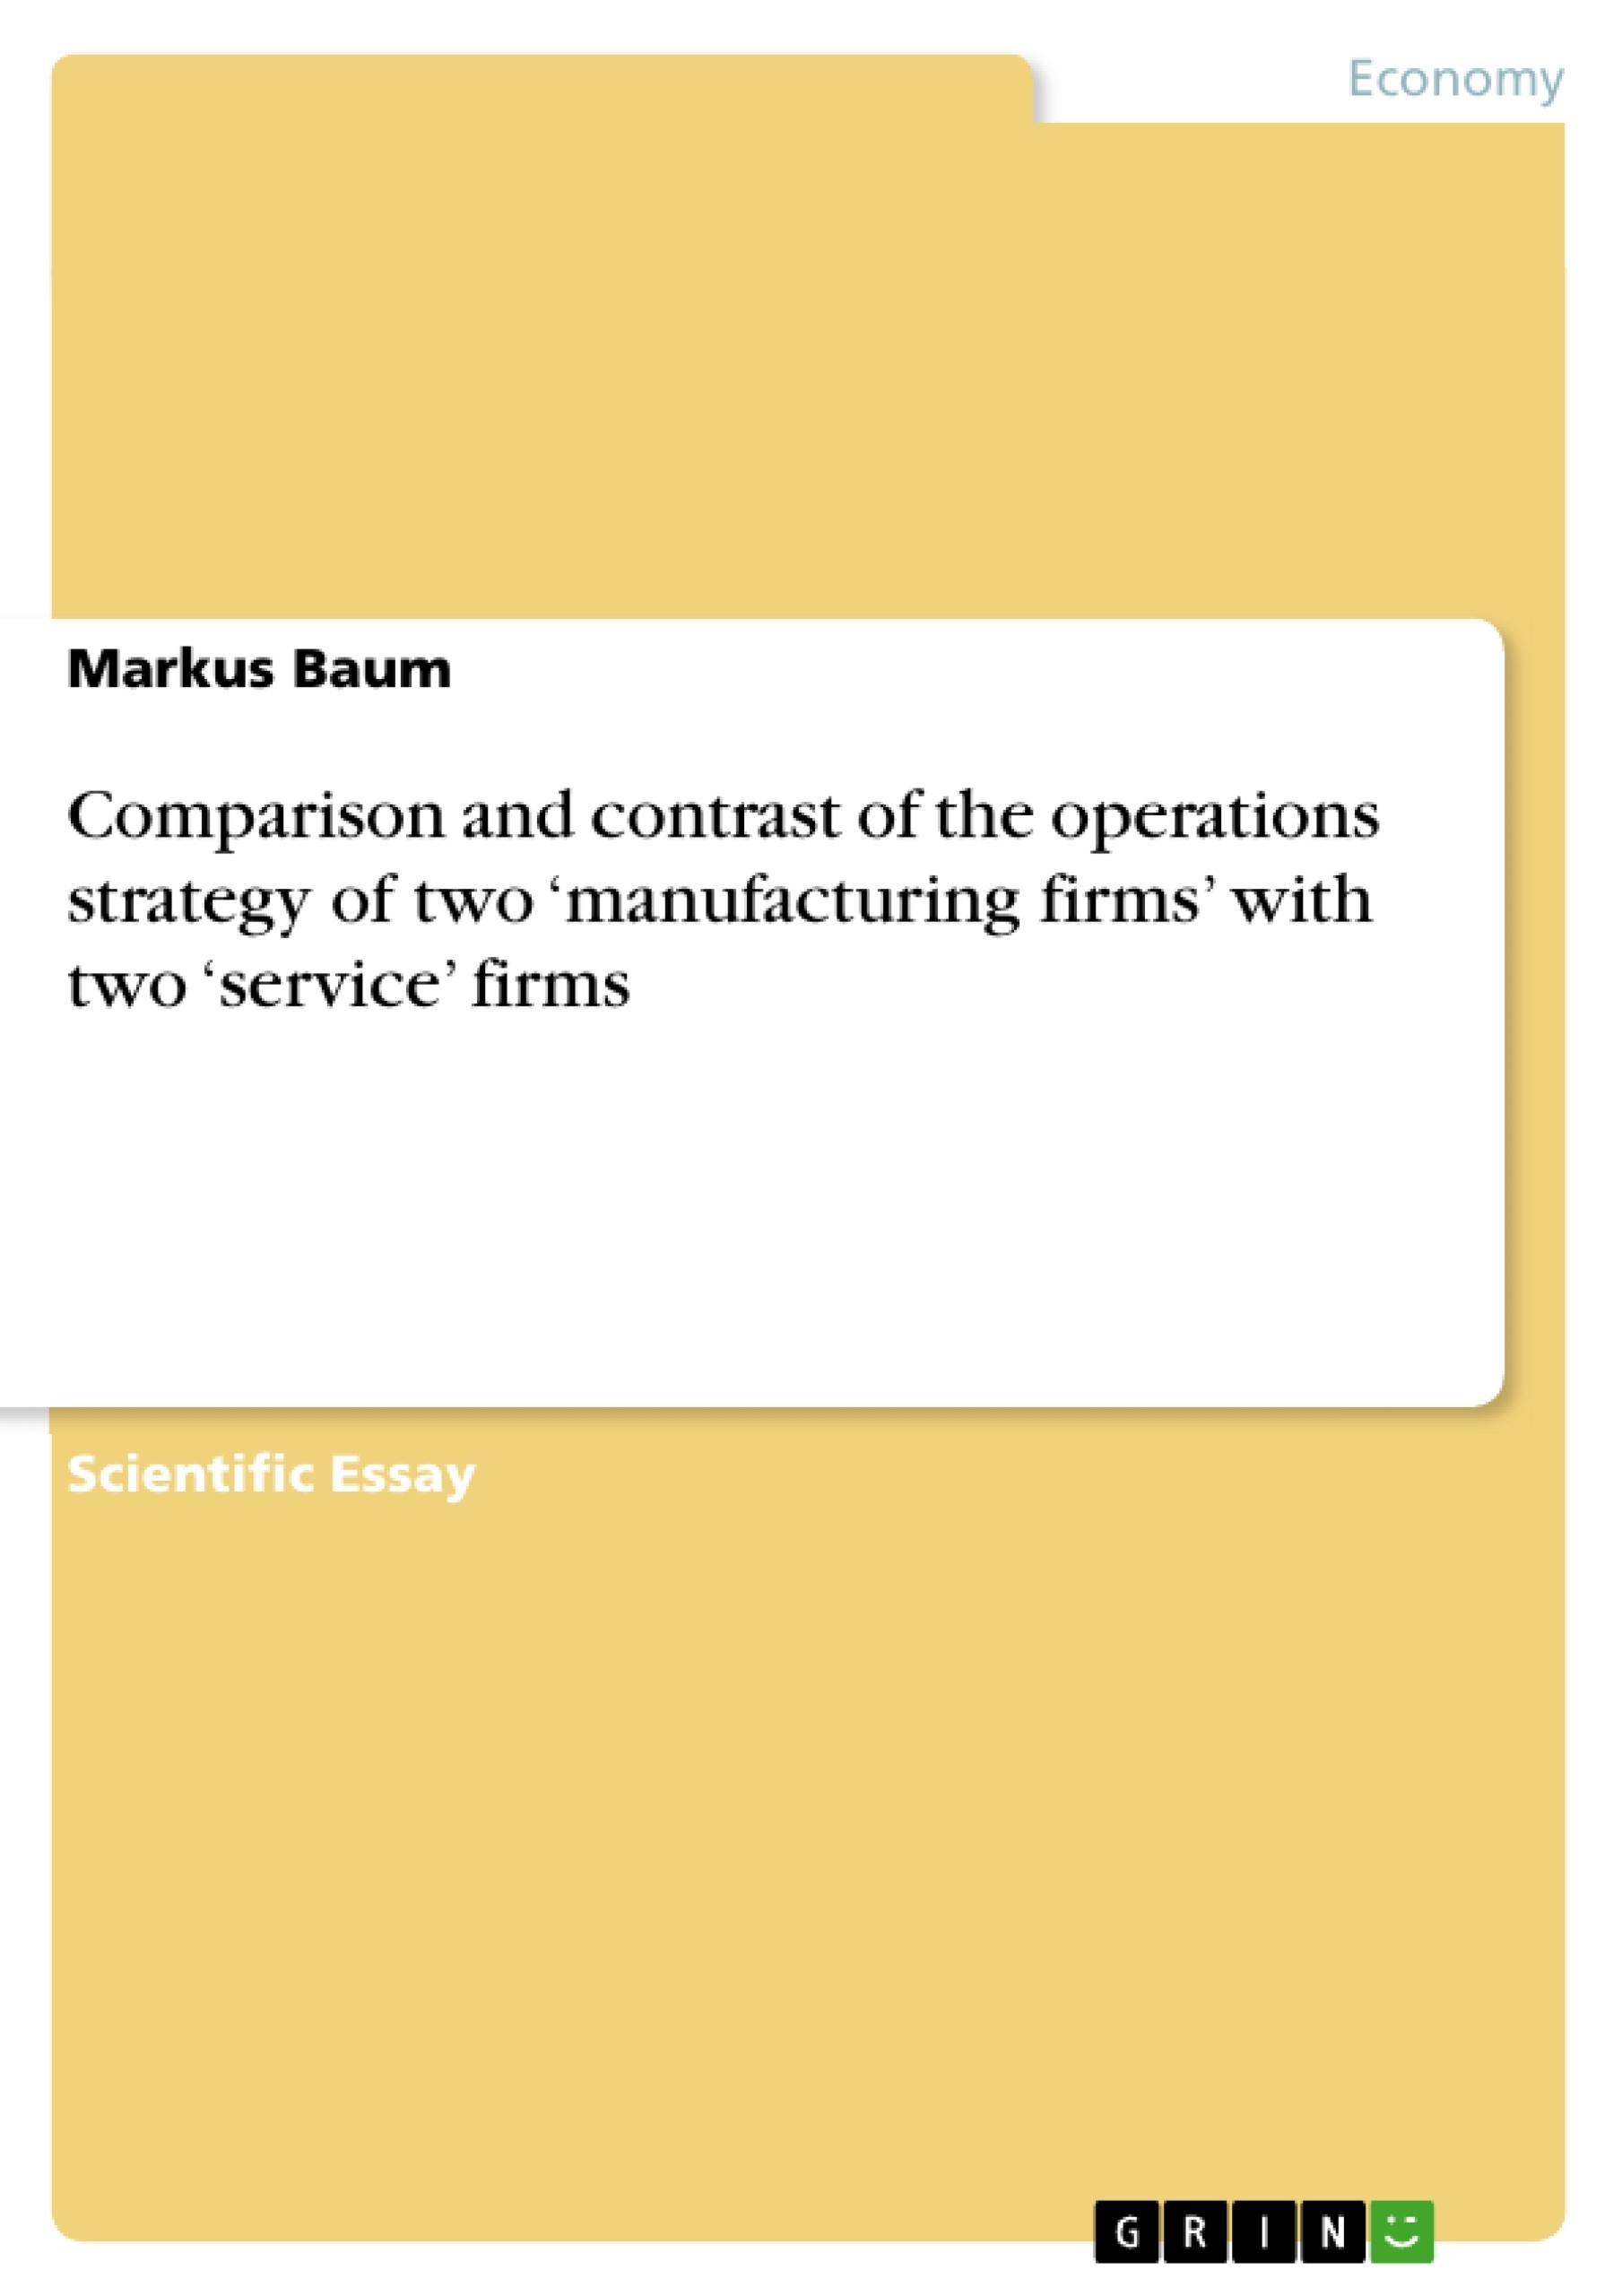 Title: Comparison and contrast of the operations strategy of two ‘manufacturing firms’ with two ‘service’ firms